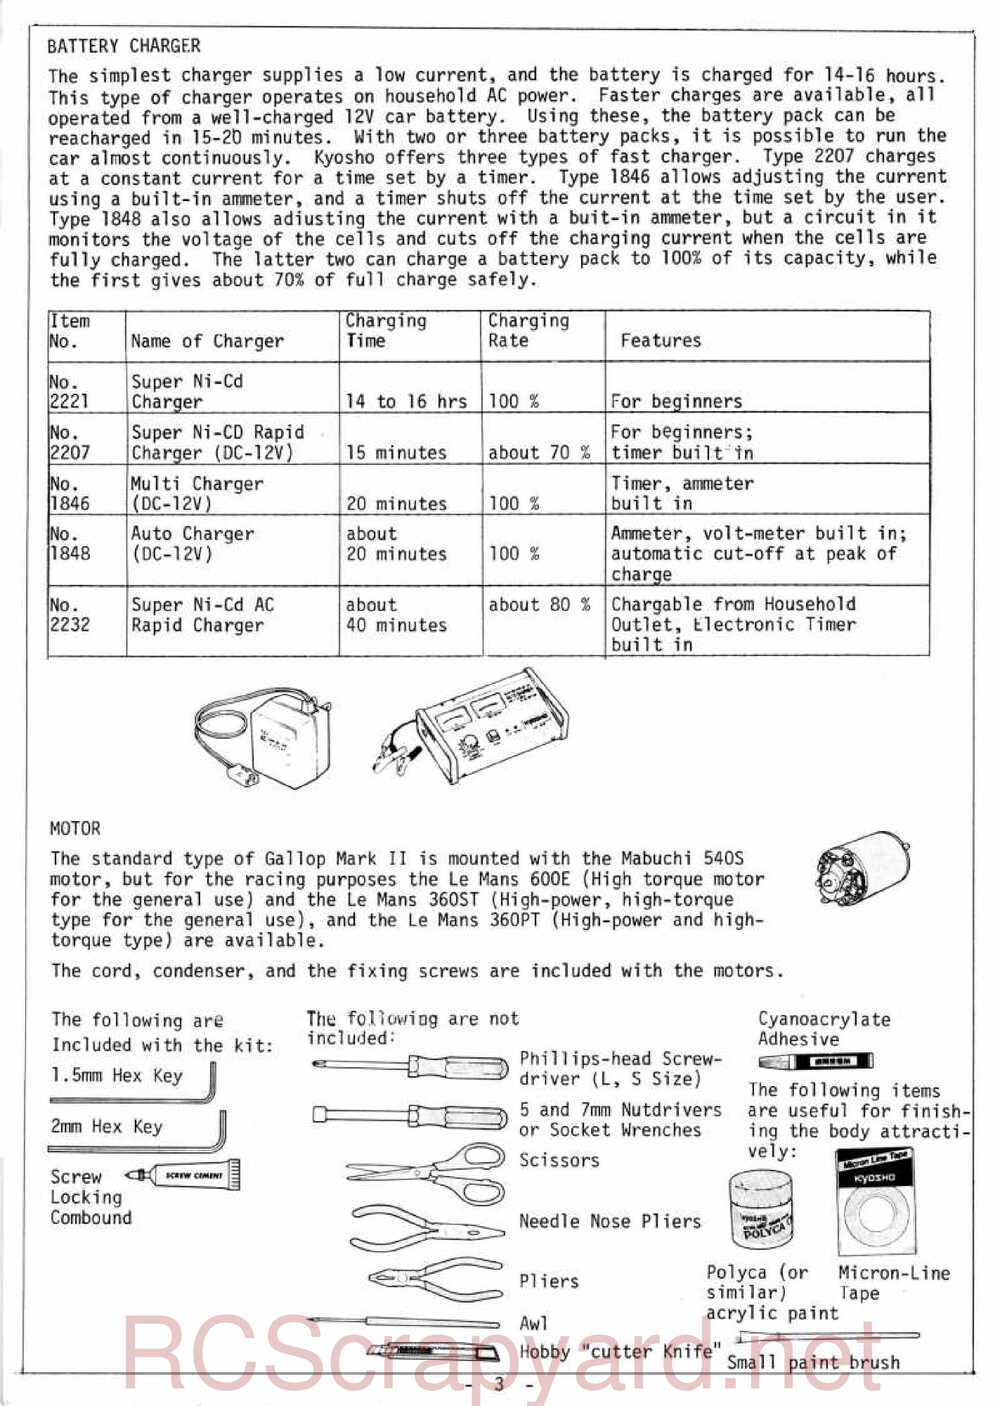 Kyosho - 3069 - Gallop MkII - Manual - Page 03